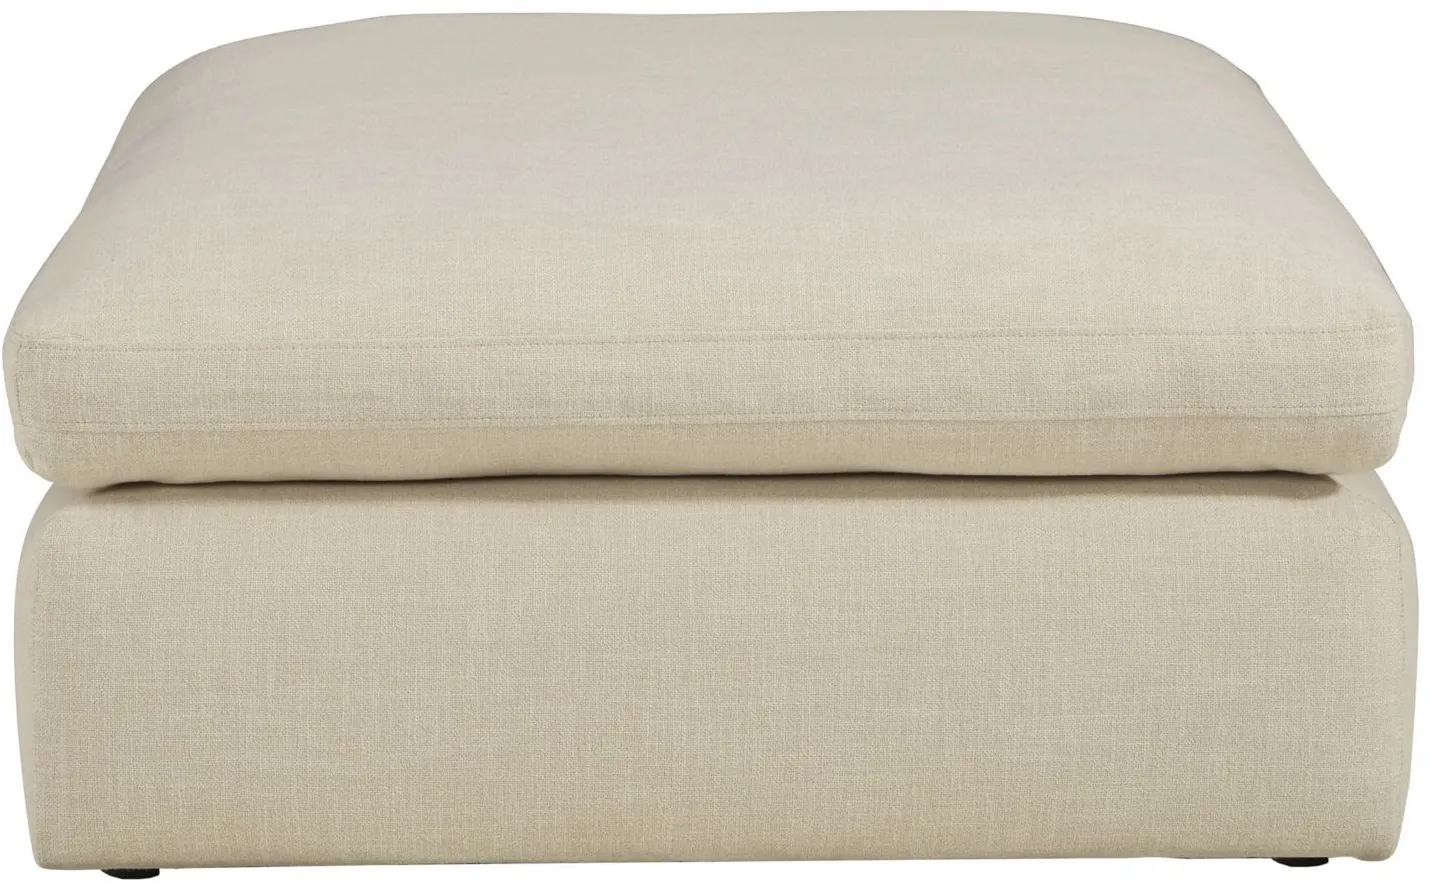 Elyza Oversized Accent Ottoman in White by Ashley Furniture